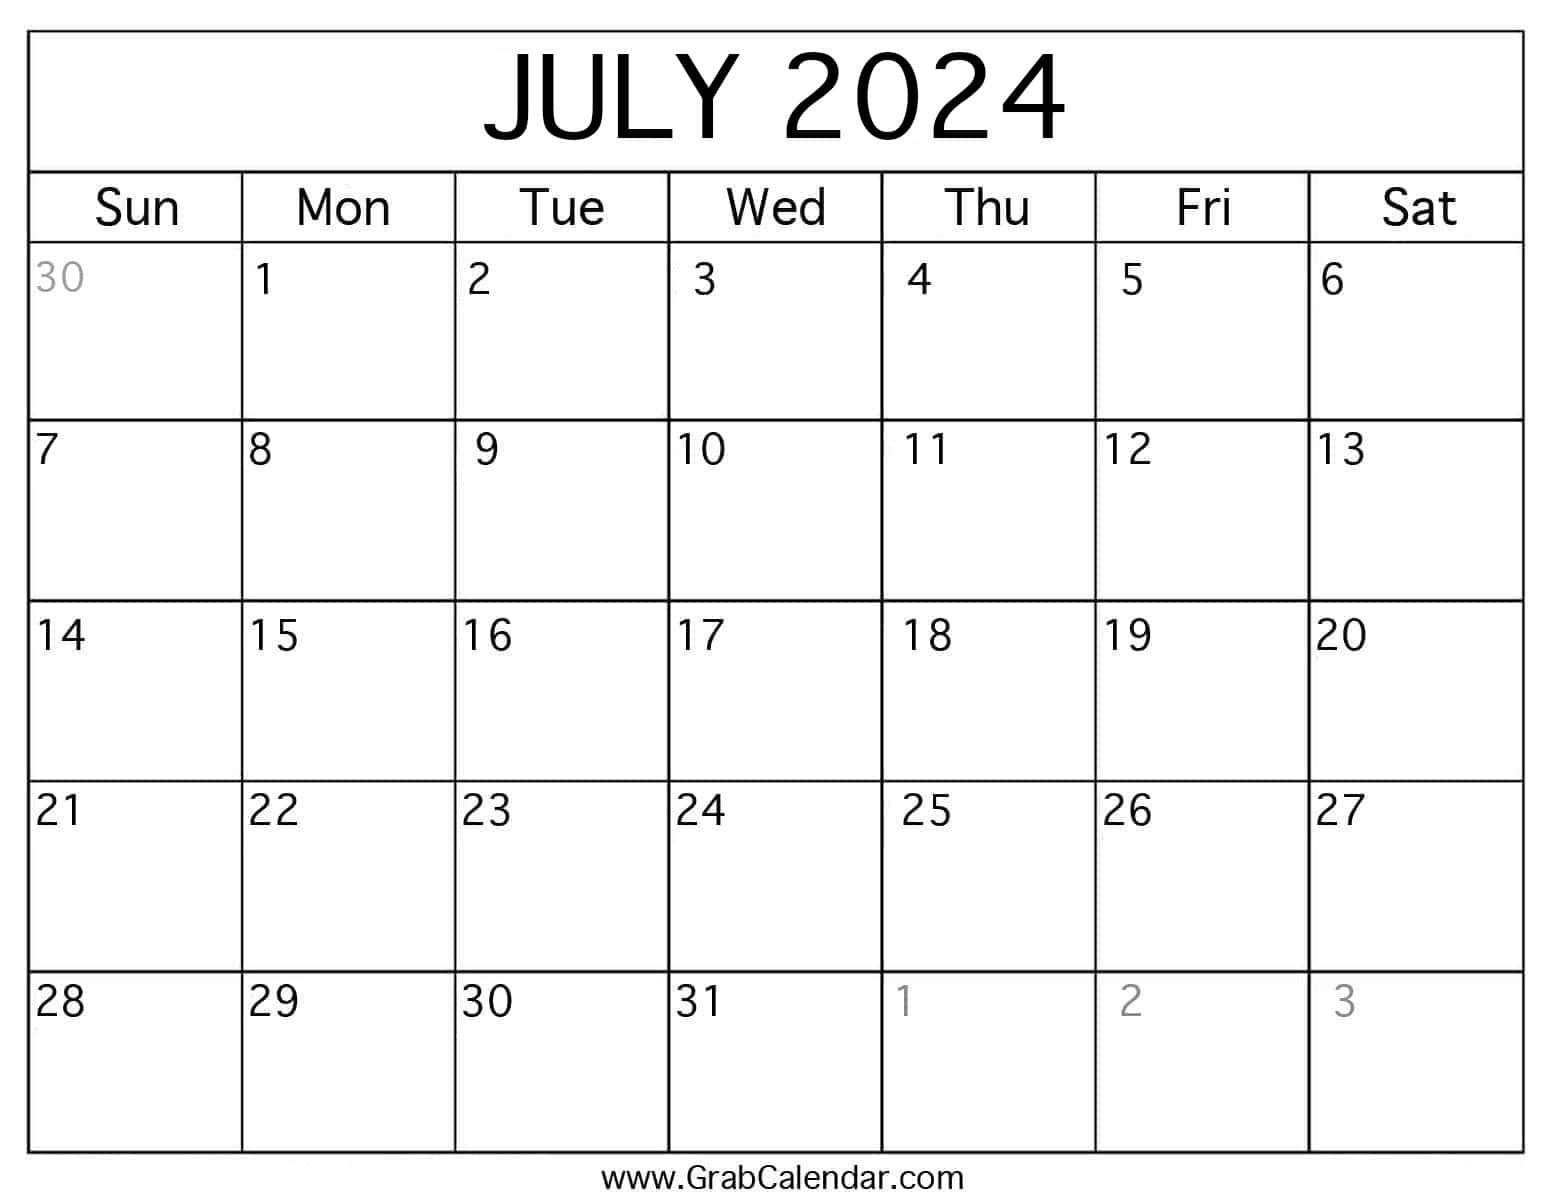 Printable July 2024 Calendar in Give Me the Calendar For July 2024